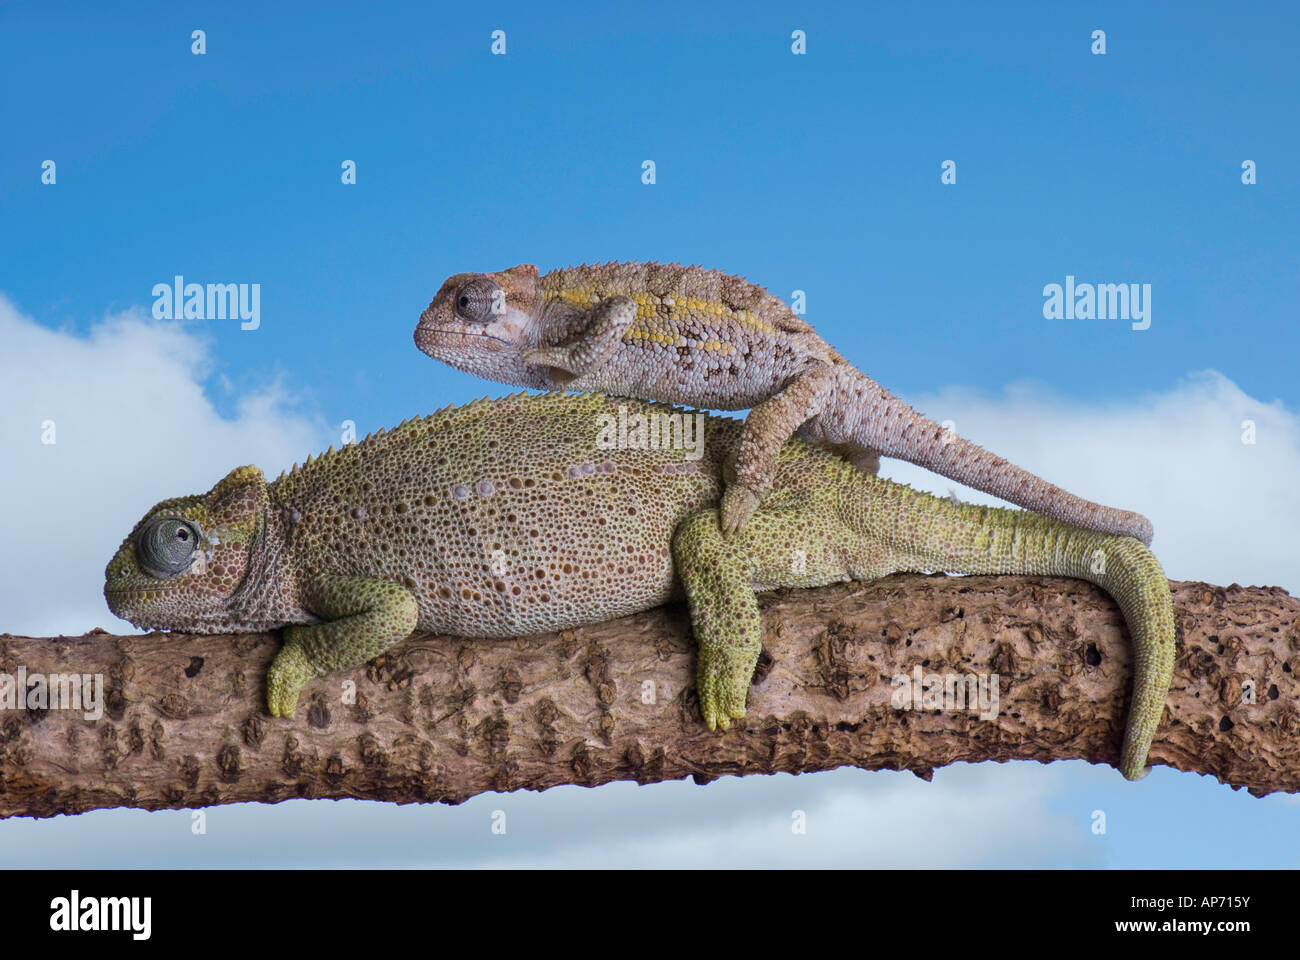 Young chameleon clambering over mother Stock Photo